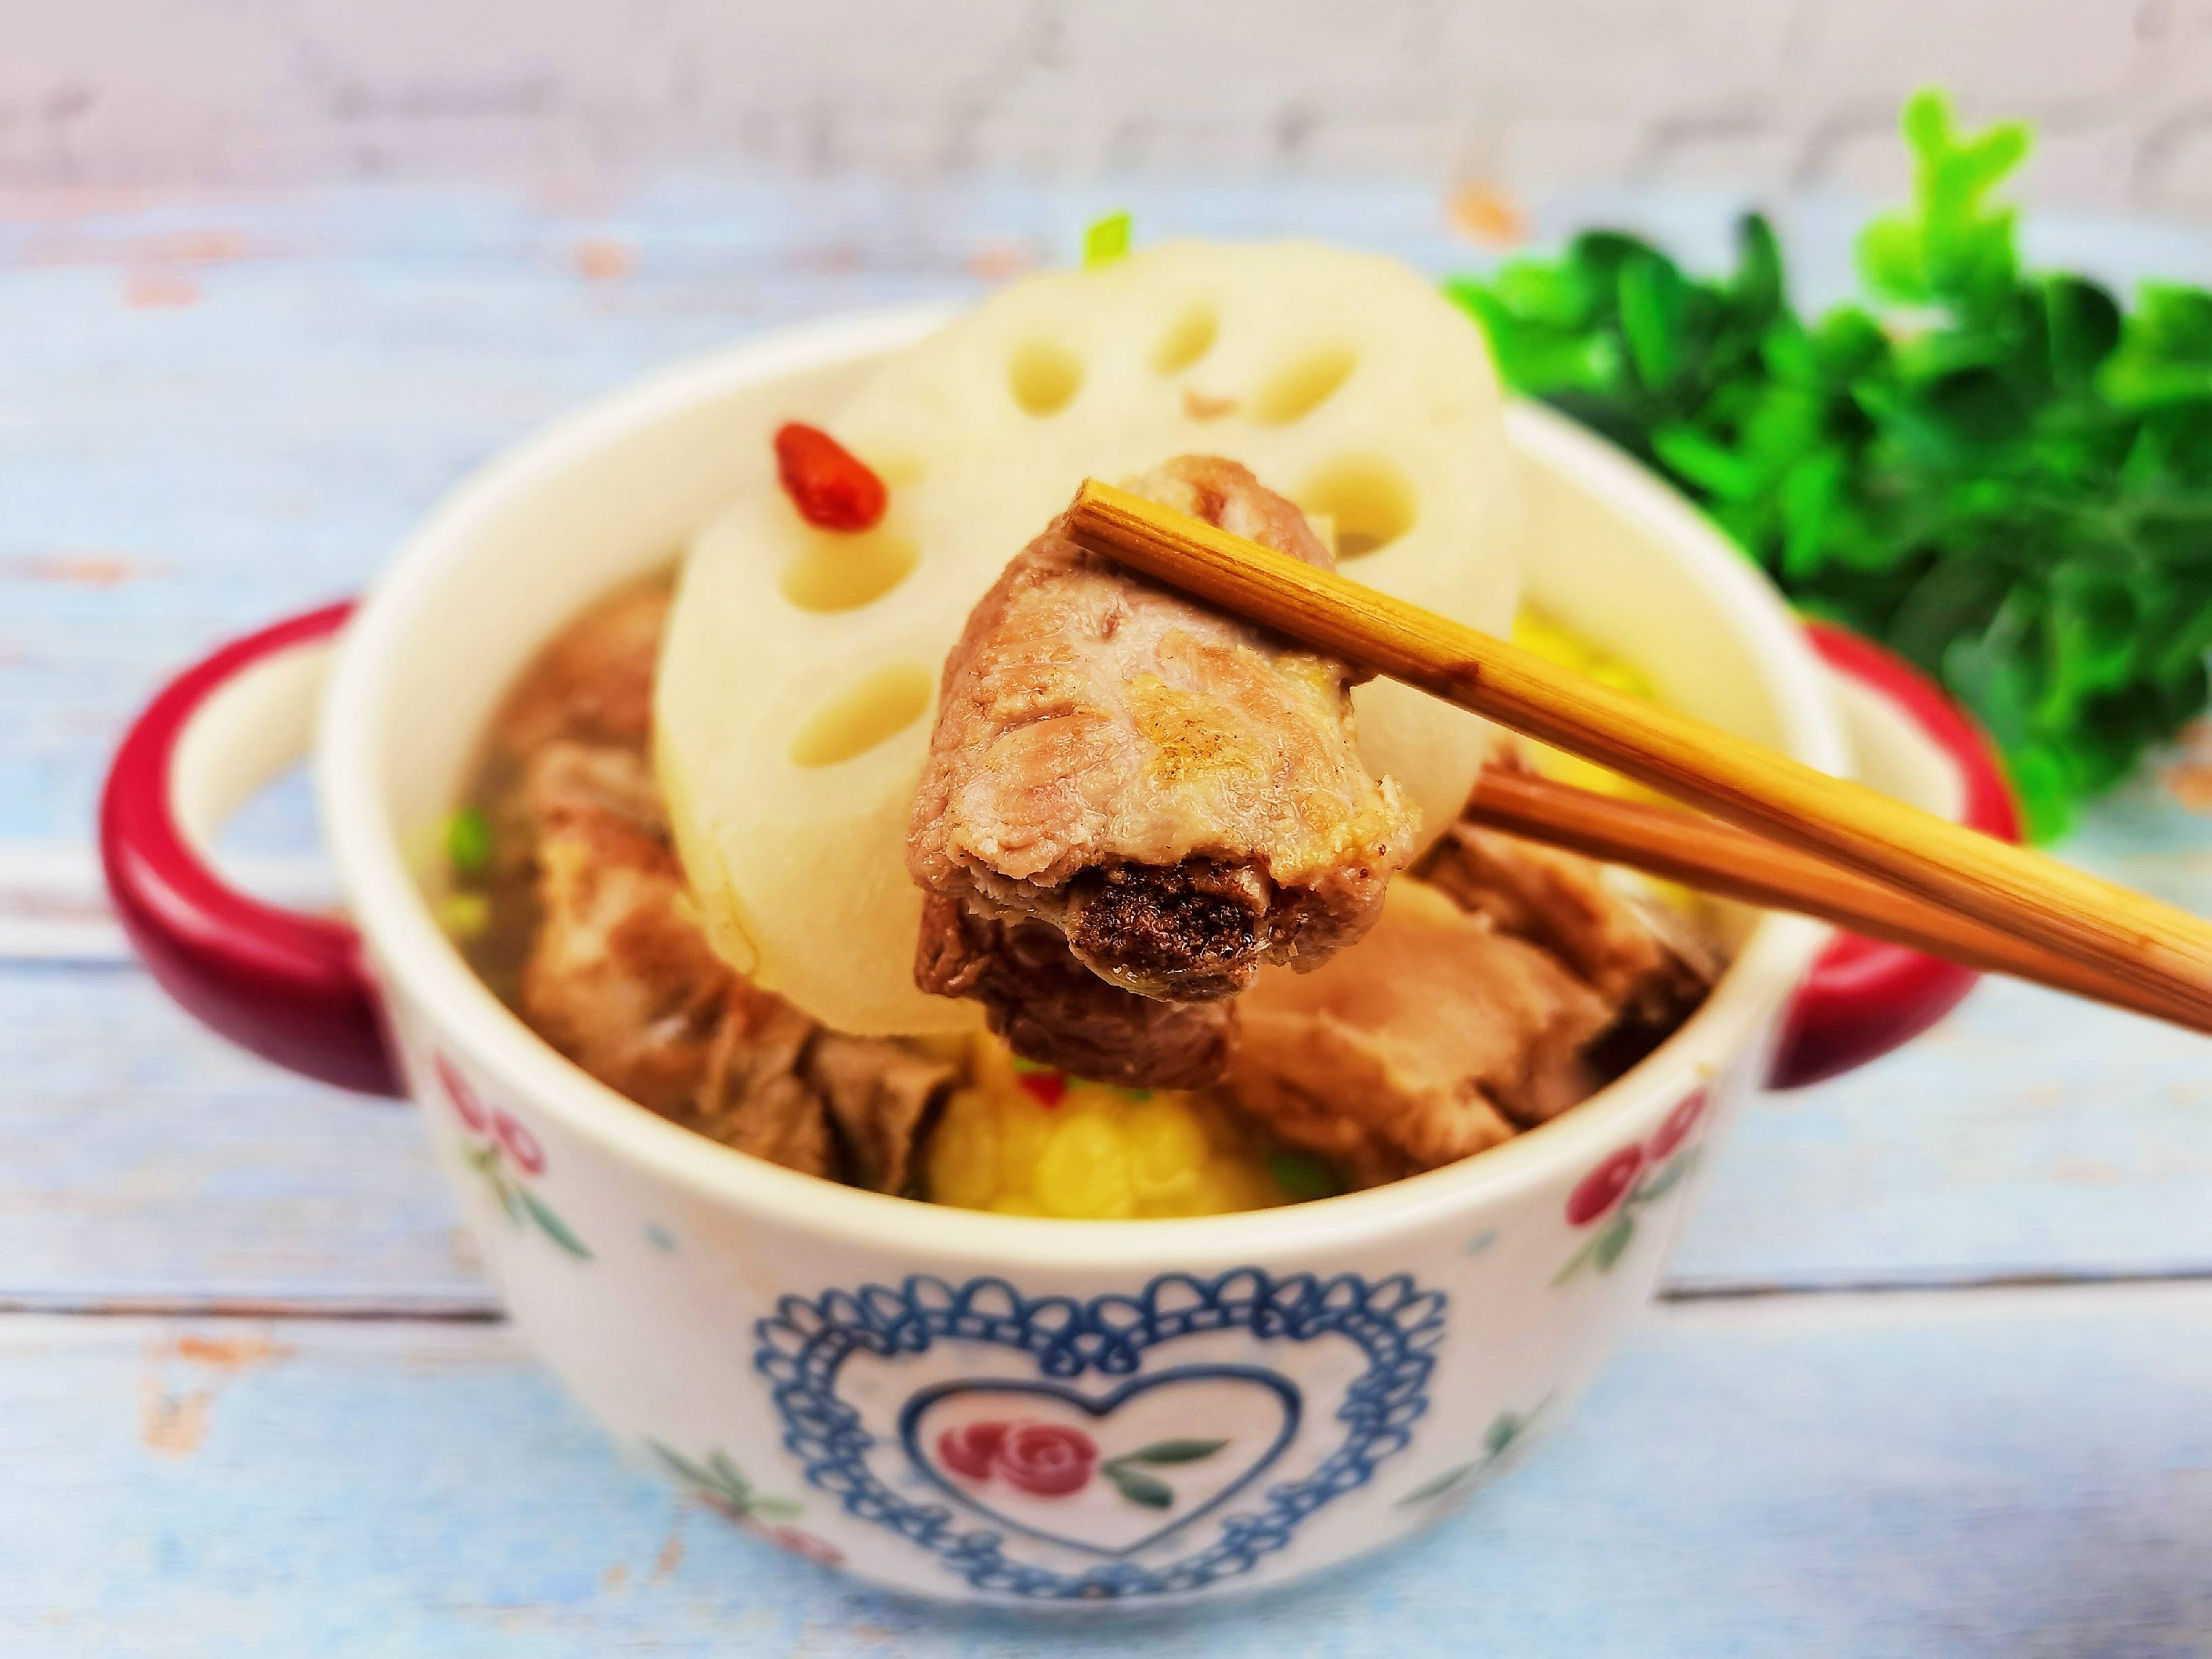 "chen Qing Ling" Wei Wuxian's Favorite Soup with Lotus Root Ribs recipe